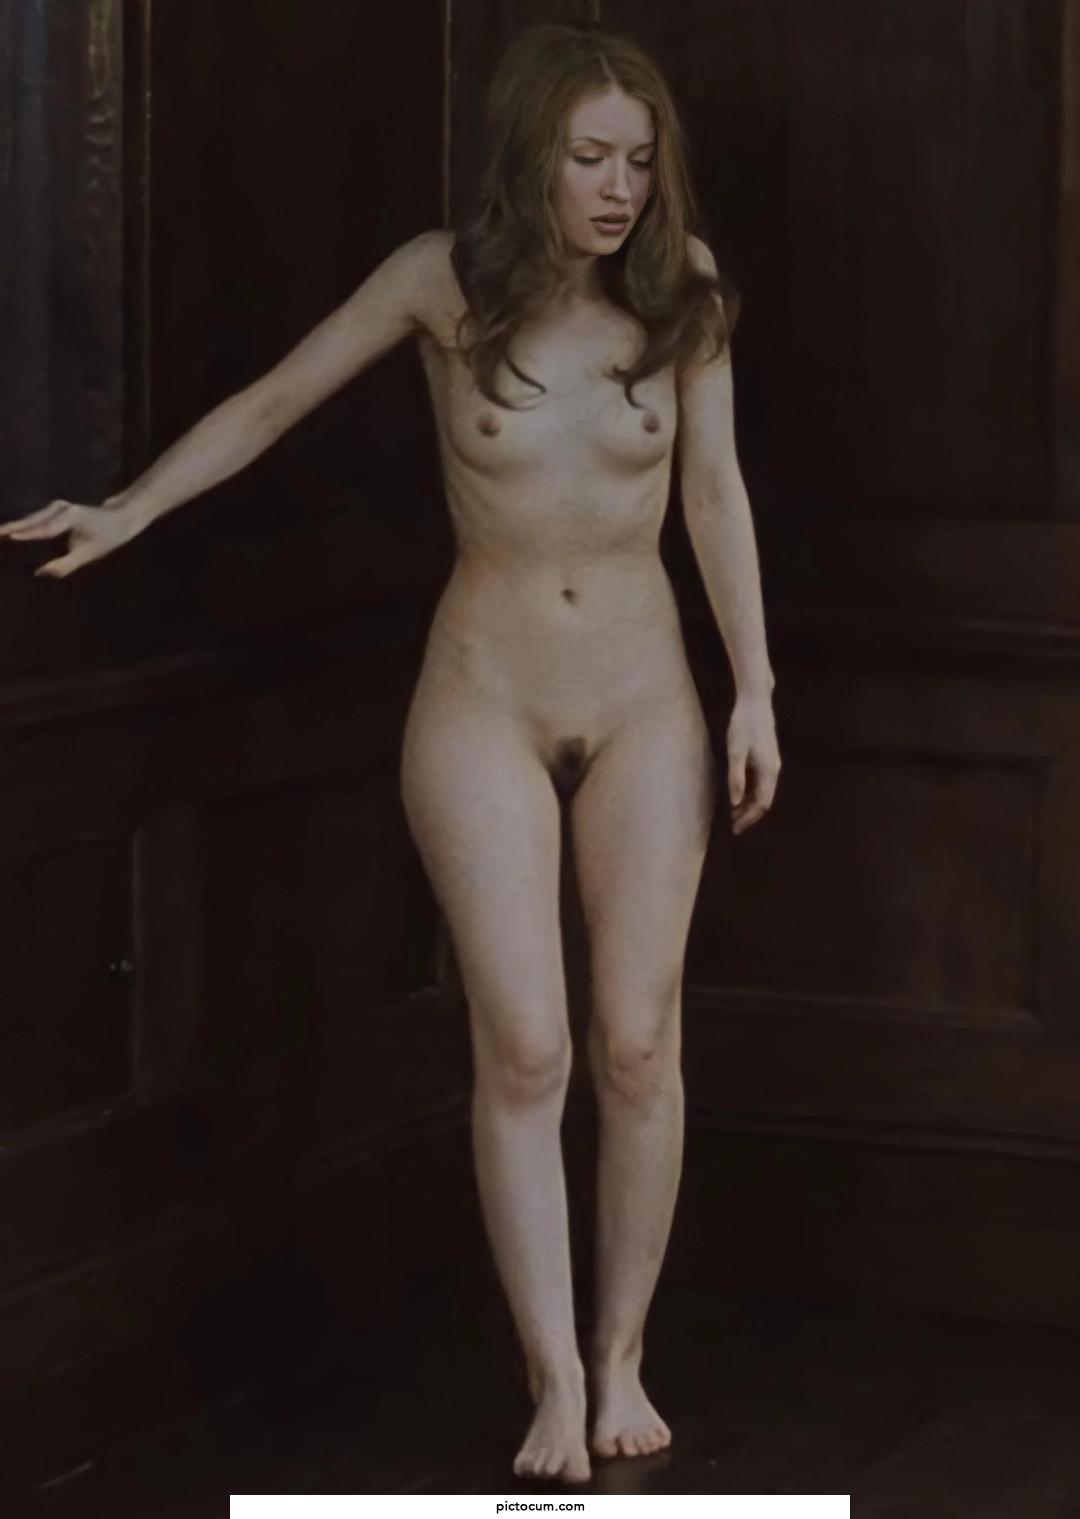 Emily Browning baring it all